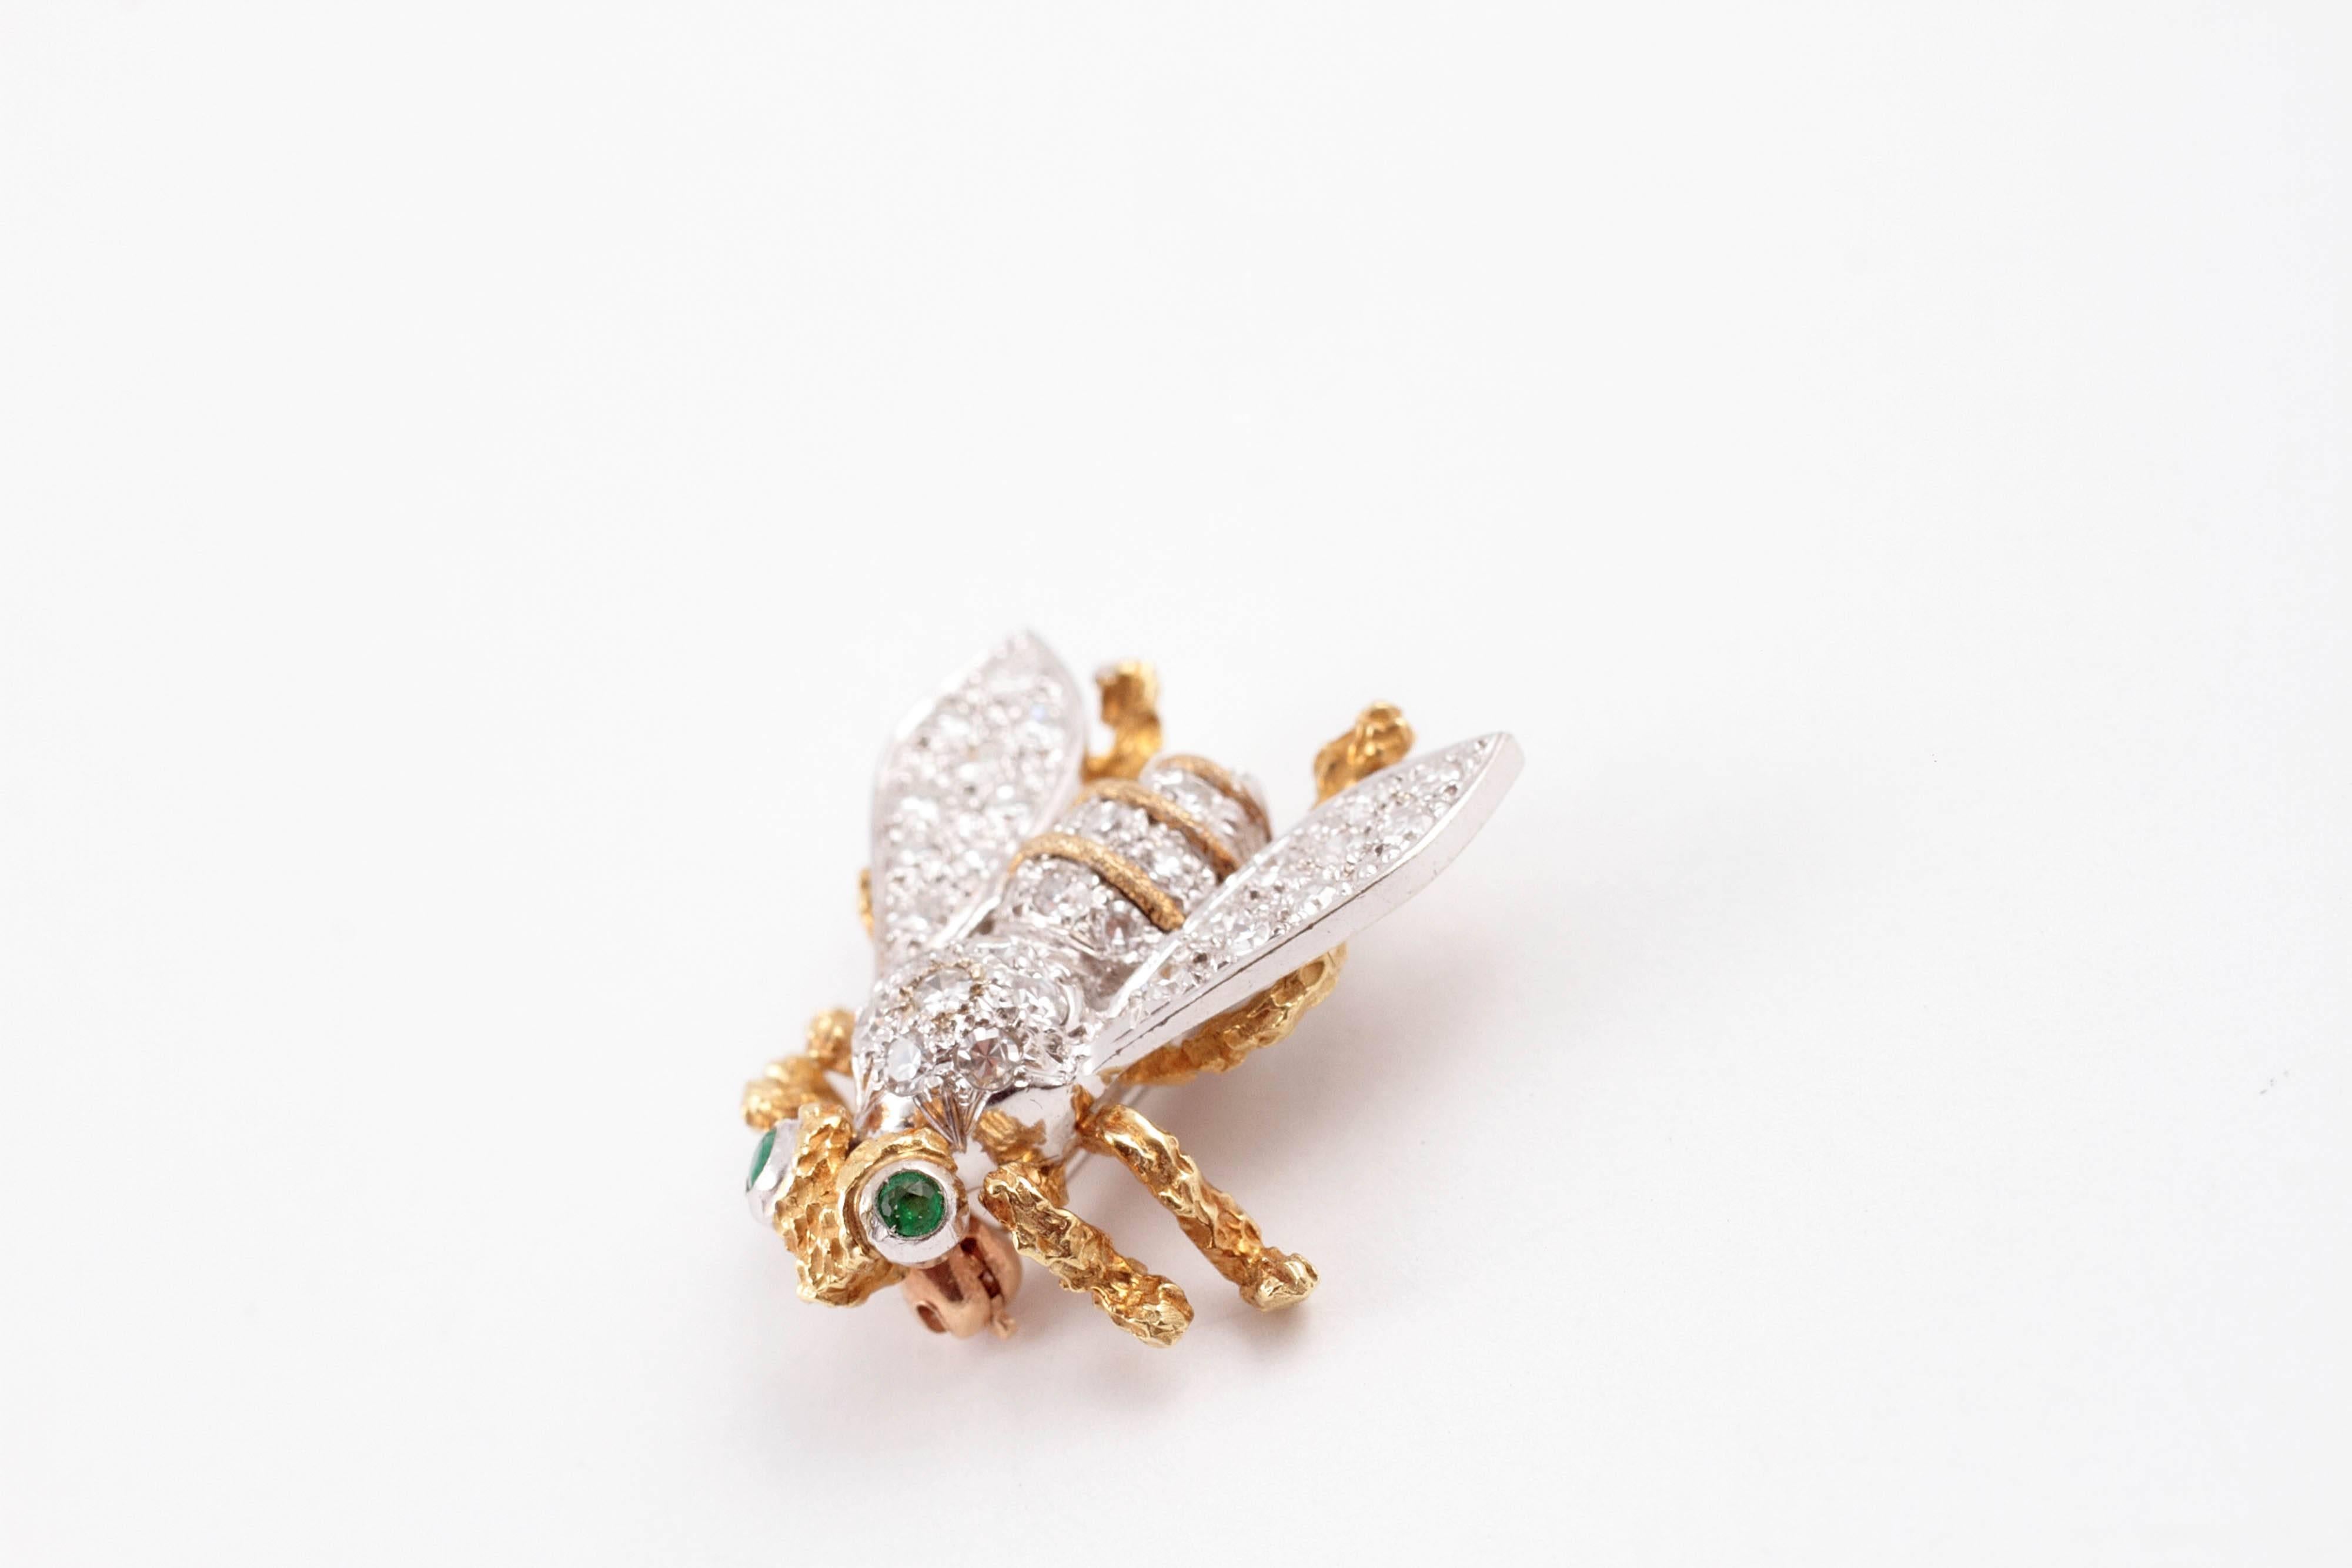 For the collector of brooches!  In 18 karat yellow and white gold, set with 0.50 cts of single-cut, round diamonds in the body and bezel-set, emerald eyes, secured with a straight pin clasp.  Diamonds are estimated to be SI in clarity and H - I in